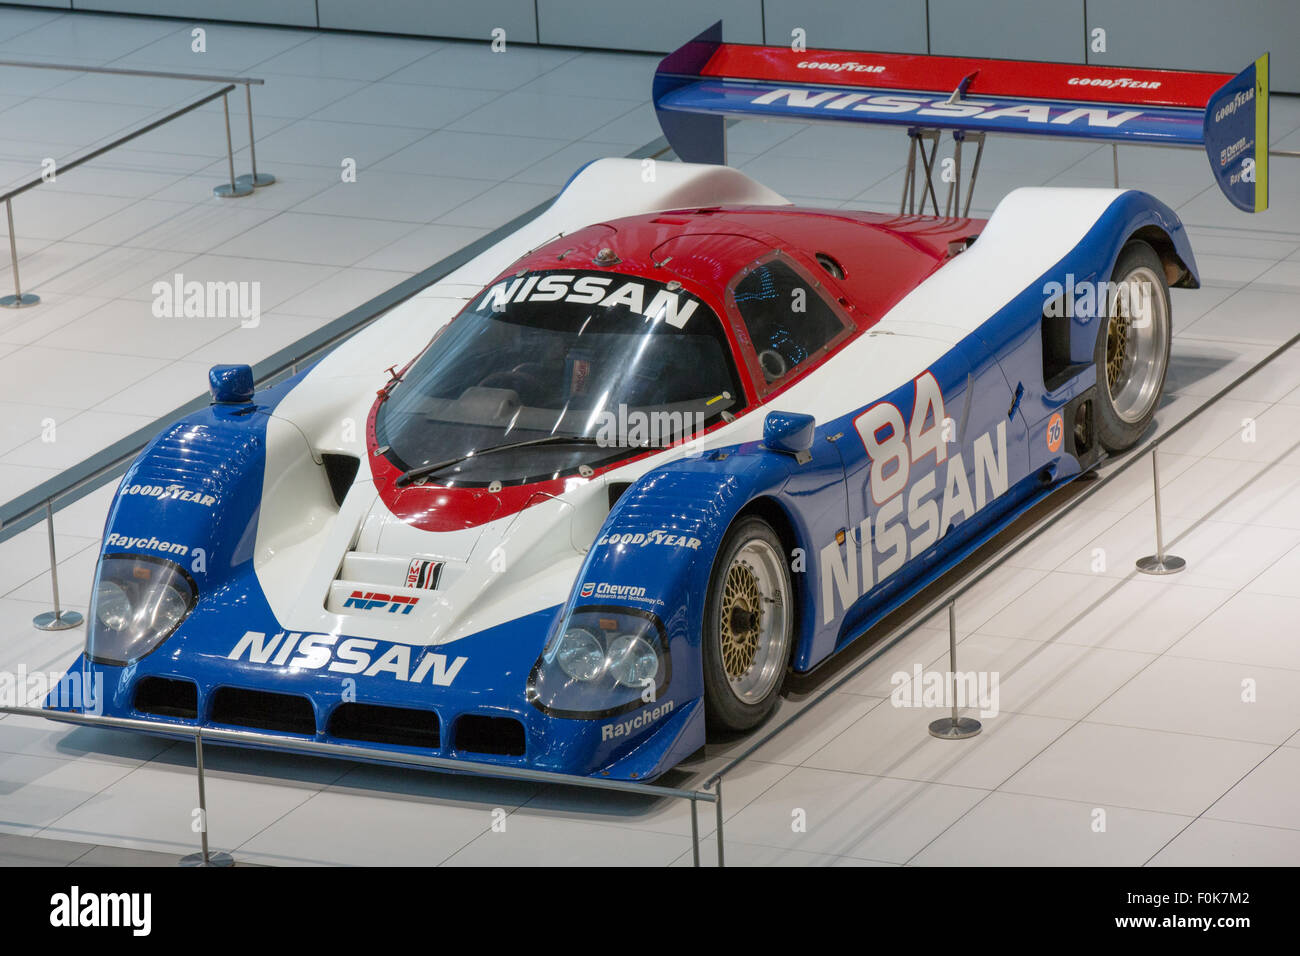 Nissan R90CK Front-left2 2015 Nissan Global Headquarters Gallery Stockfoto